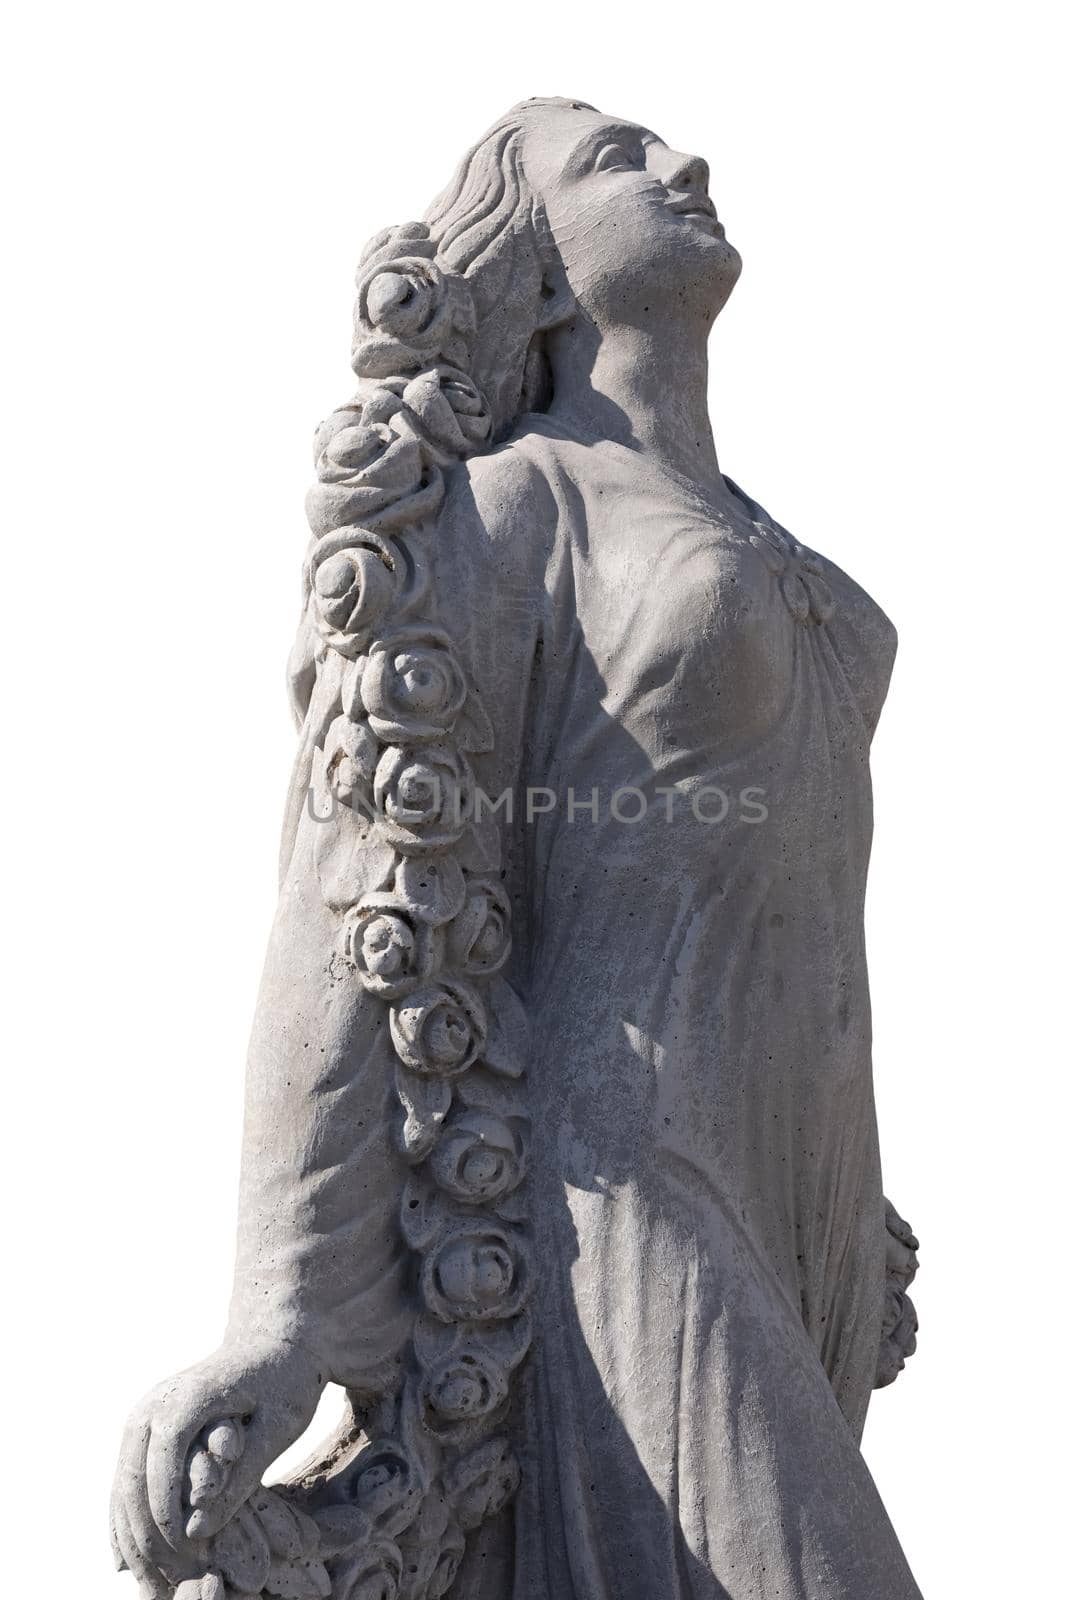 Side view of stone sculpture of woman looking up on white background. art and classical style romantic figurative stone sculpture.